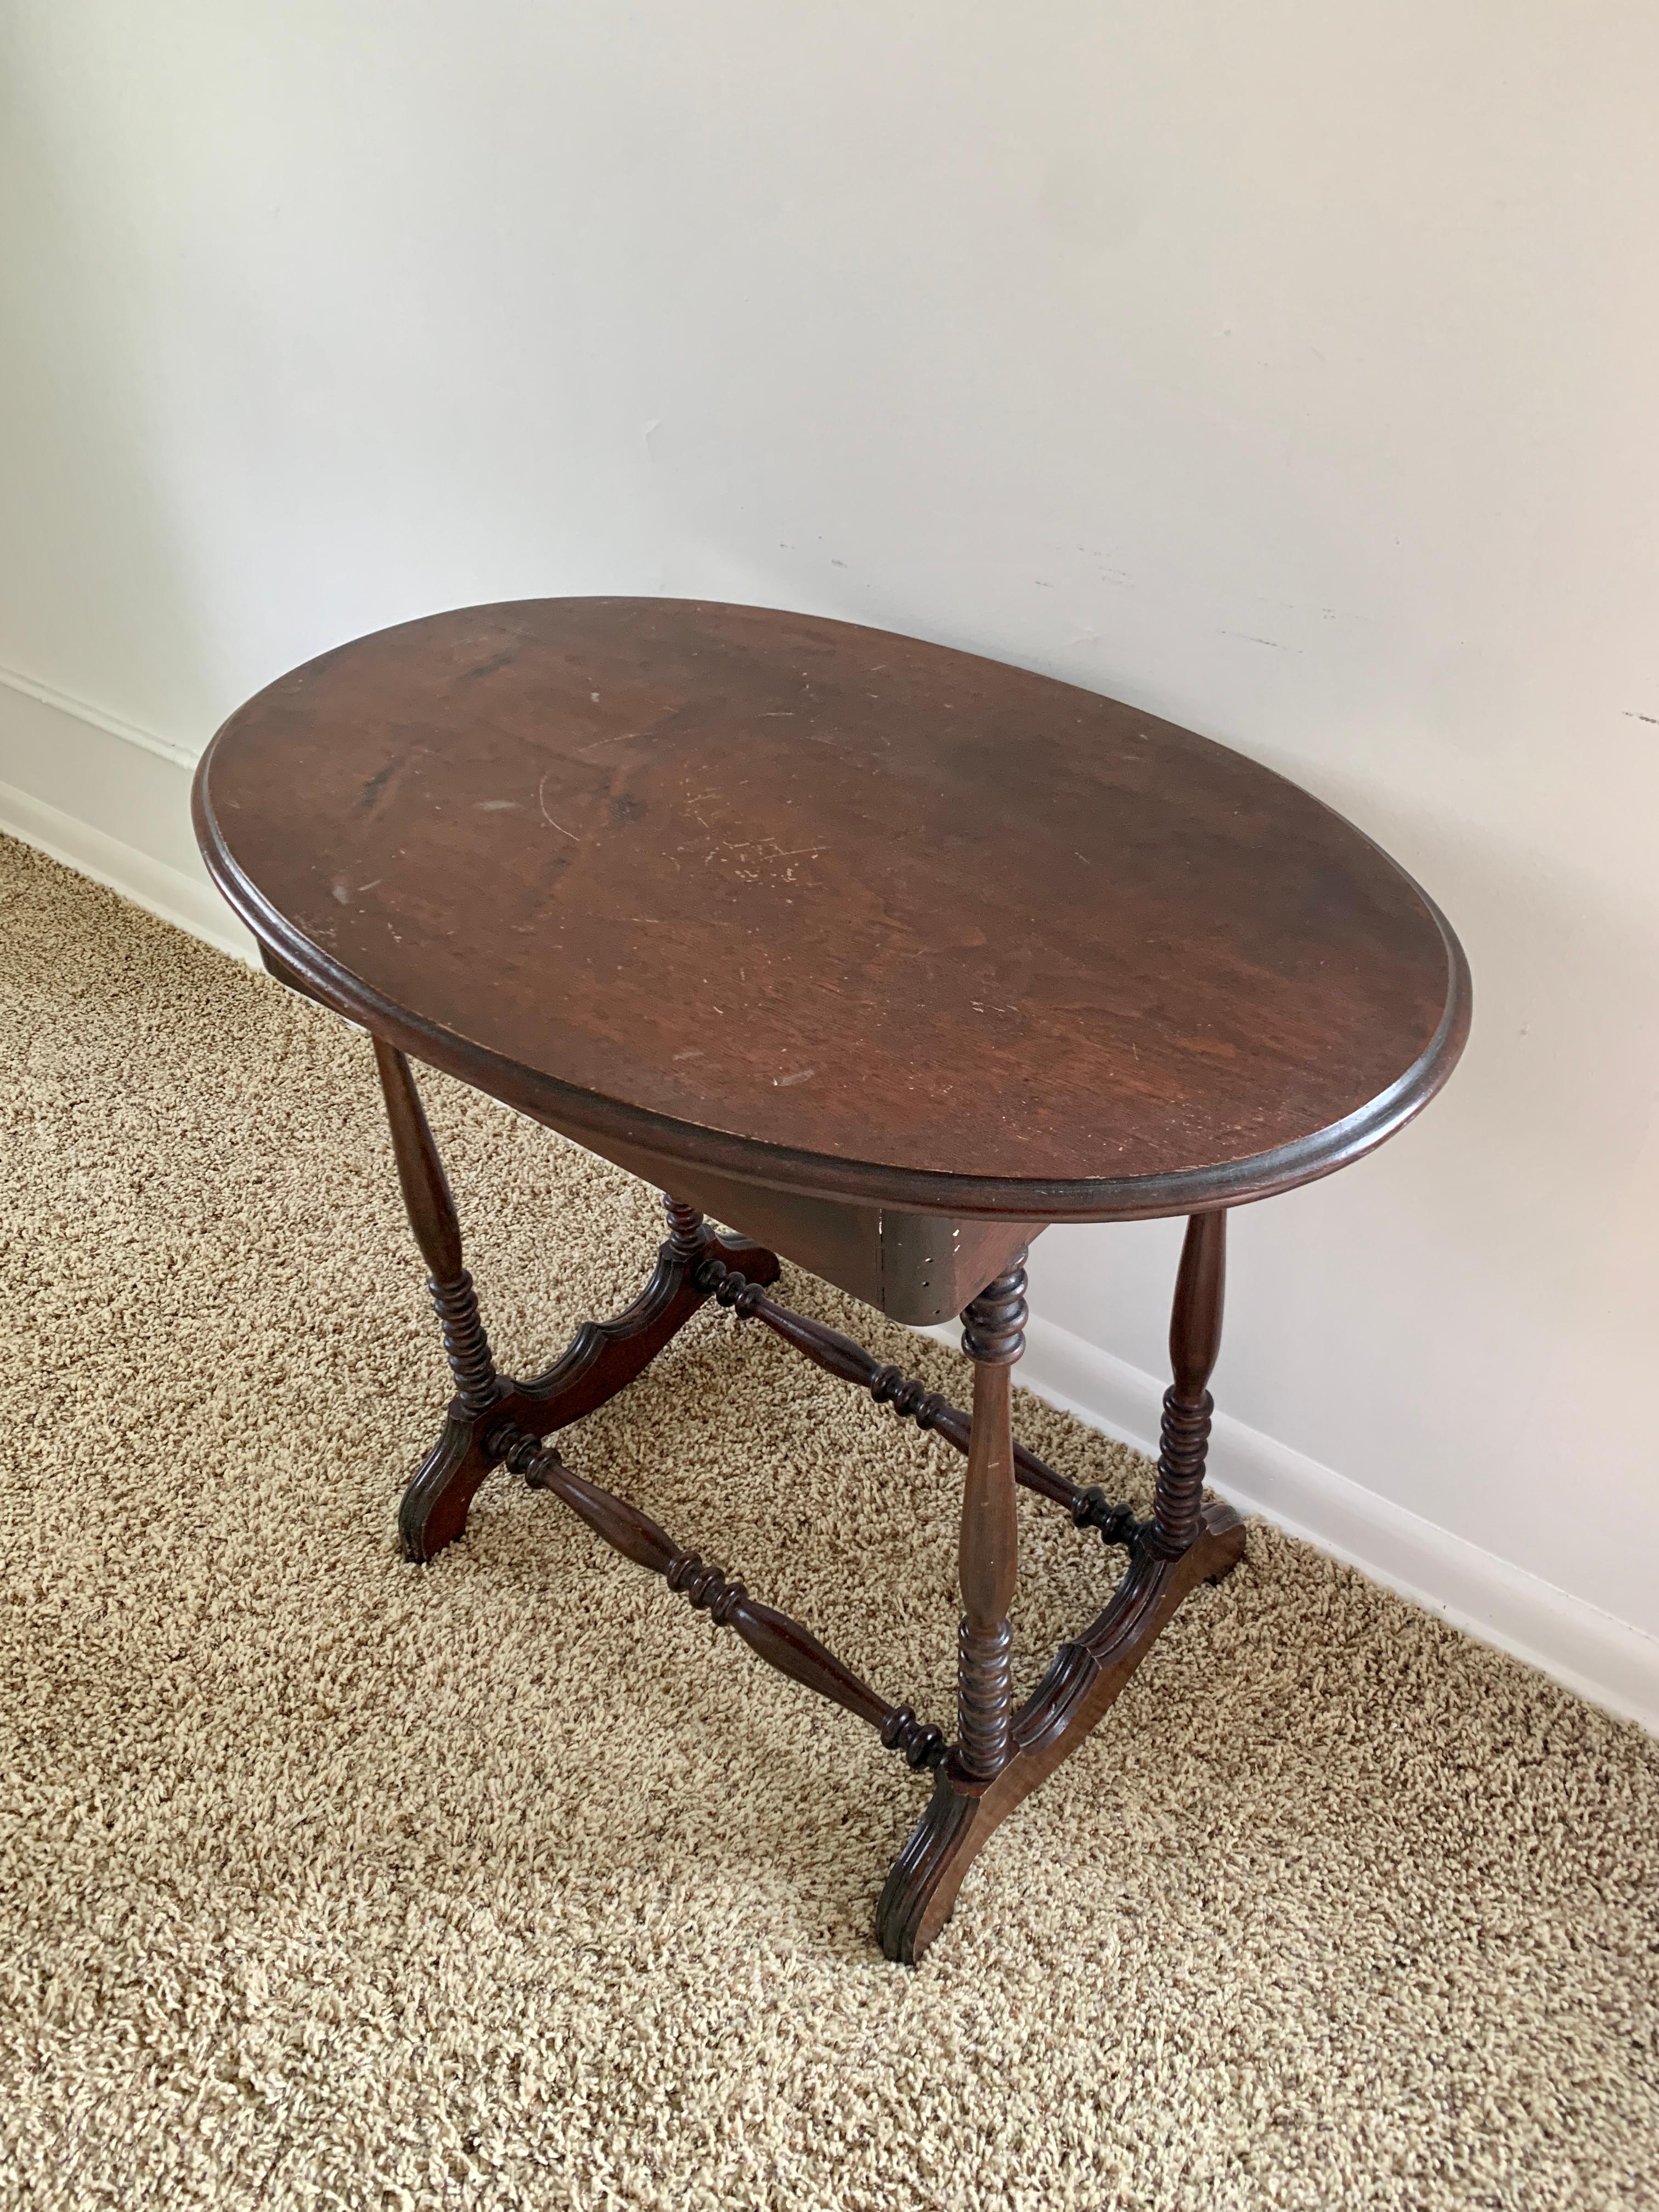 Late 19th Century American Victorian Oval Walnut Side Table In Good Condition For Sale In Elkhart, IN